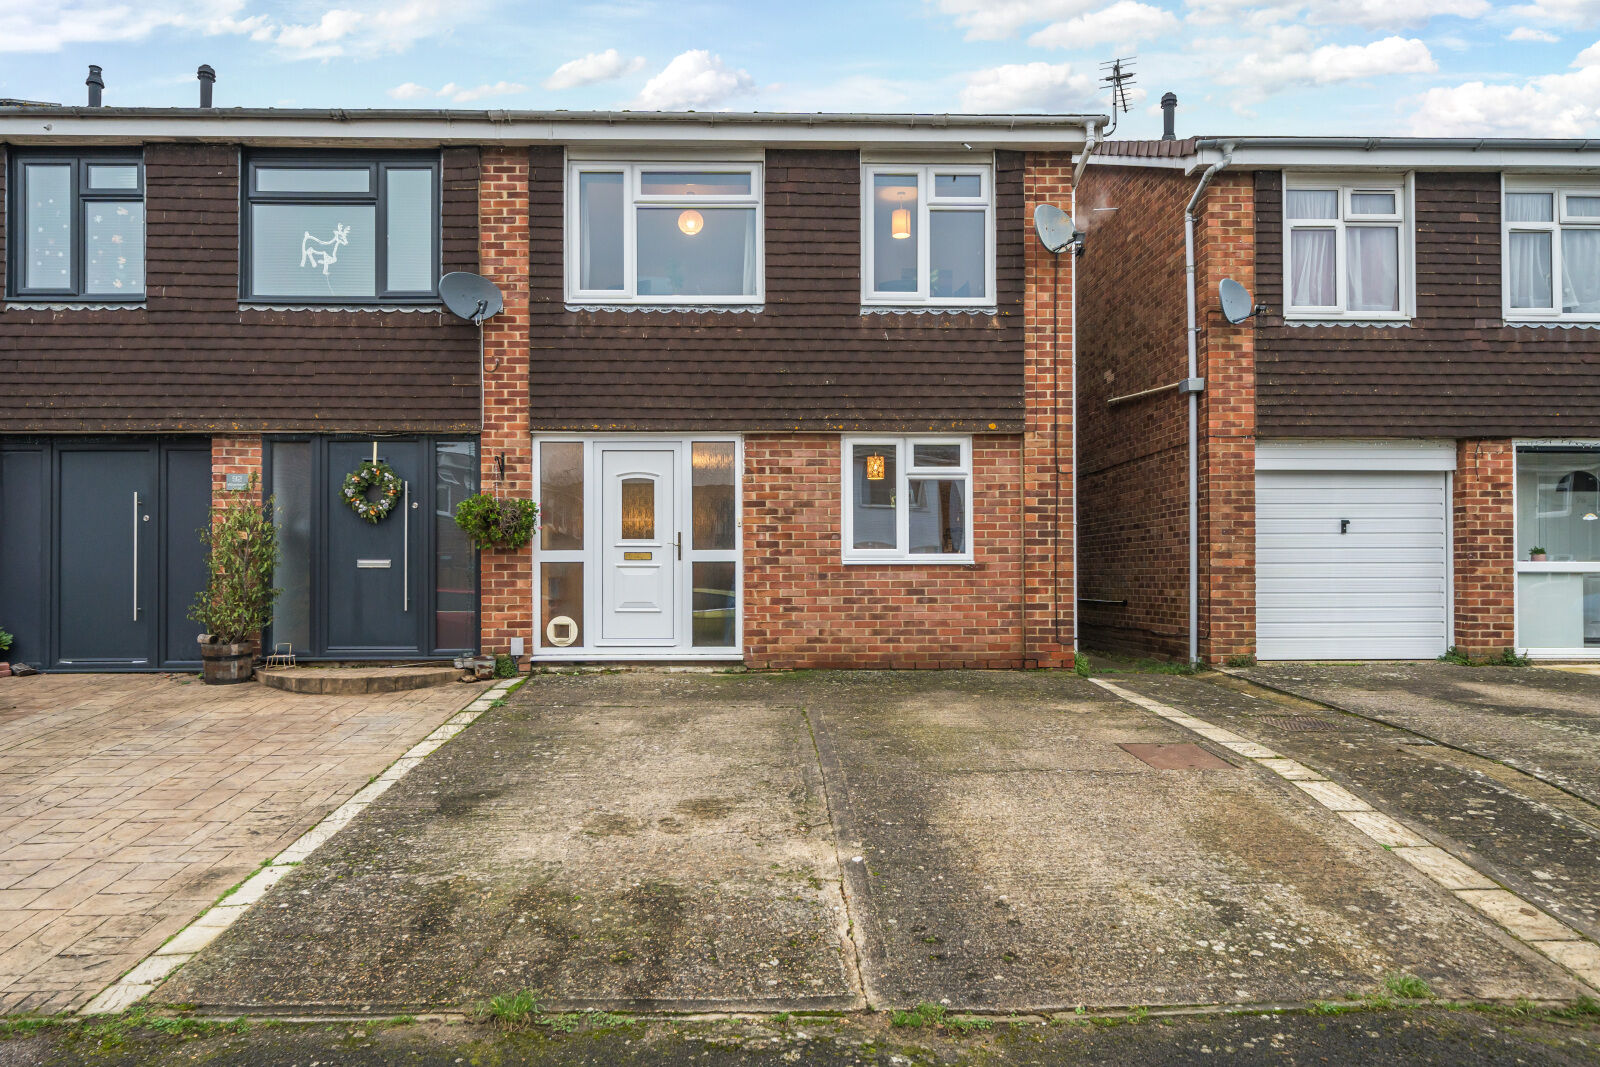 3 bedroom end terraced house for sale Winterborne Road, Abingdon, OX14, main image